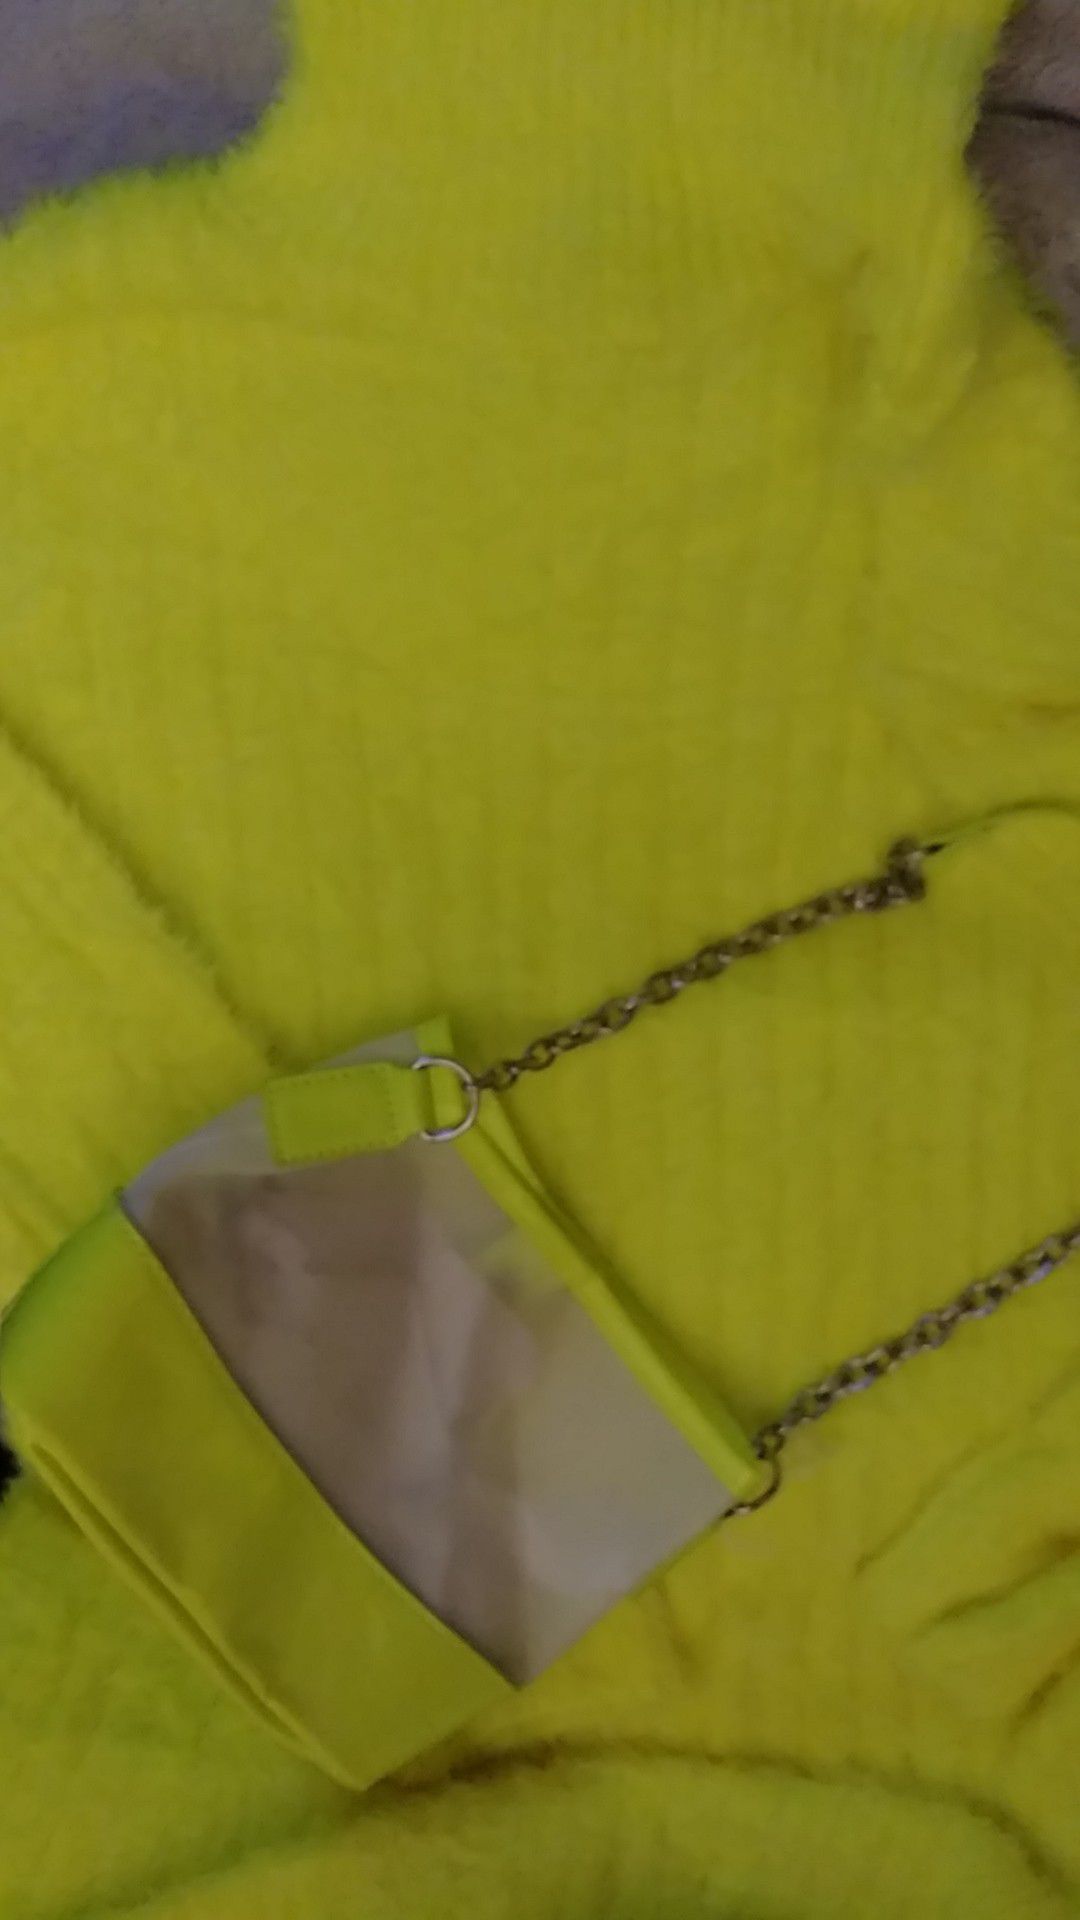 Flourescent yellow long sleeve body sweater dress. Size 3X. But is more like a 2X? And purse to match. $20. New.